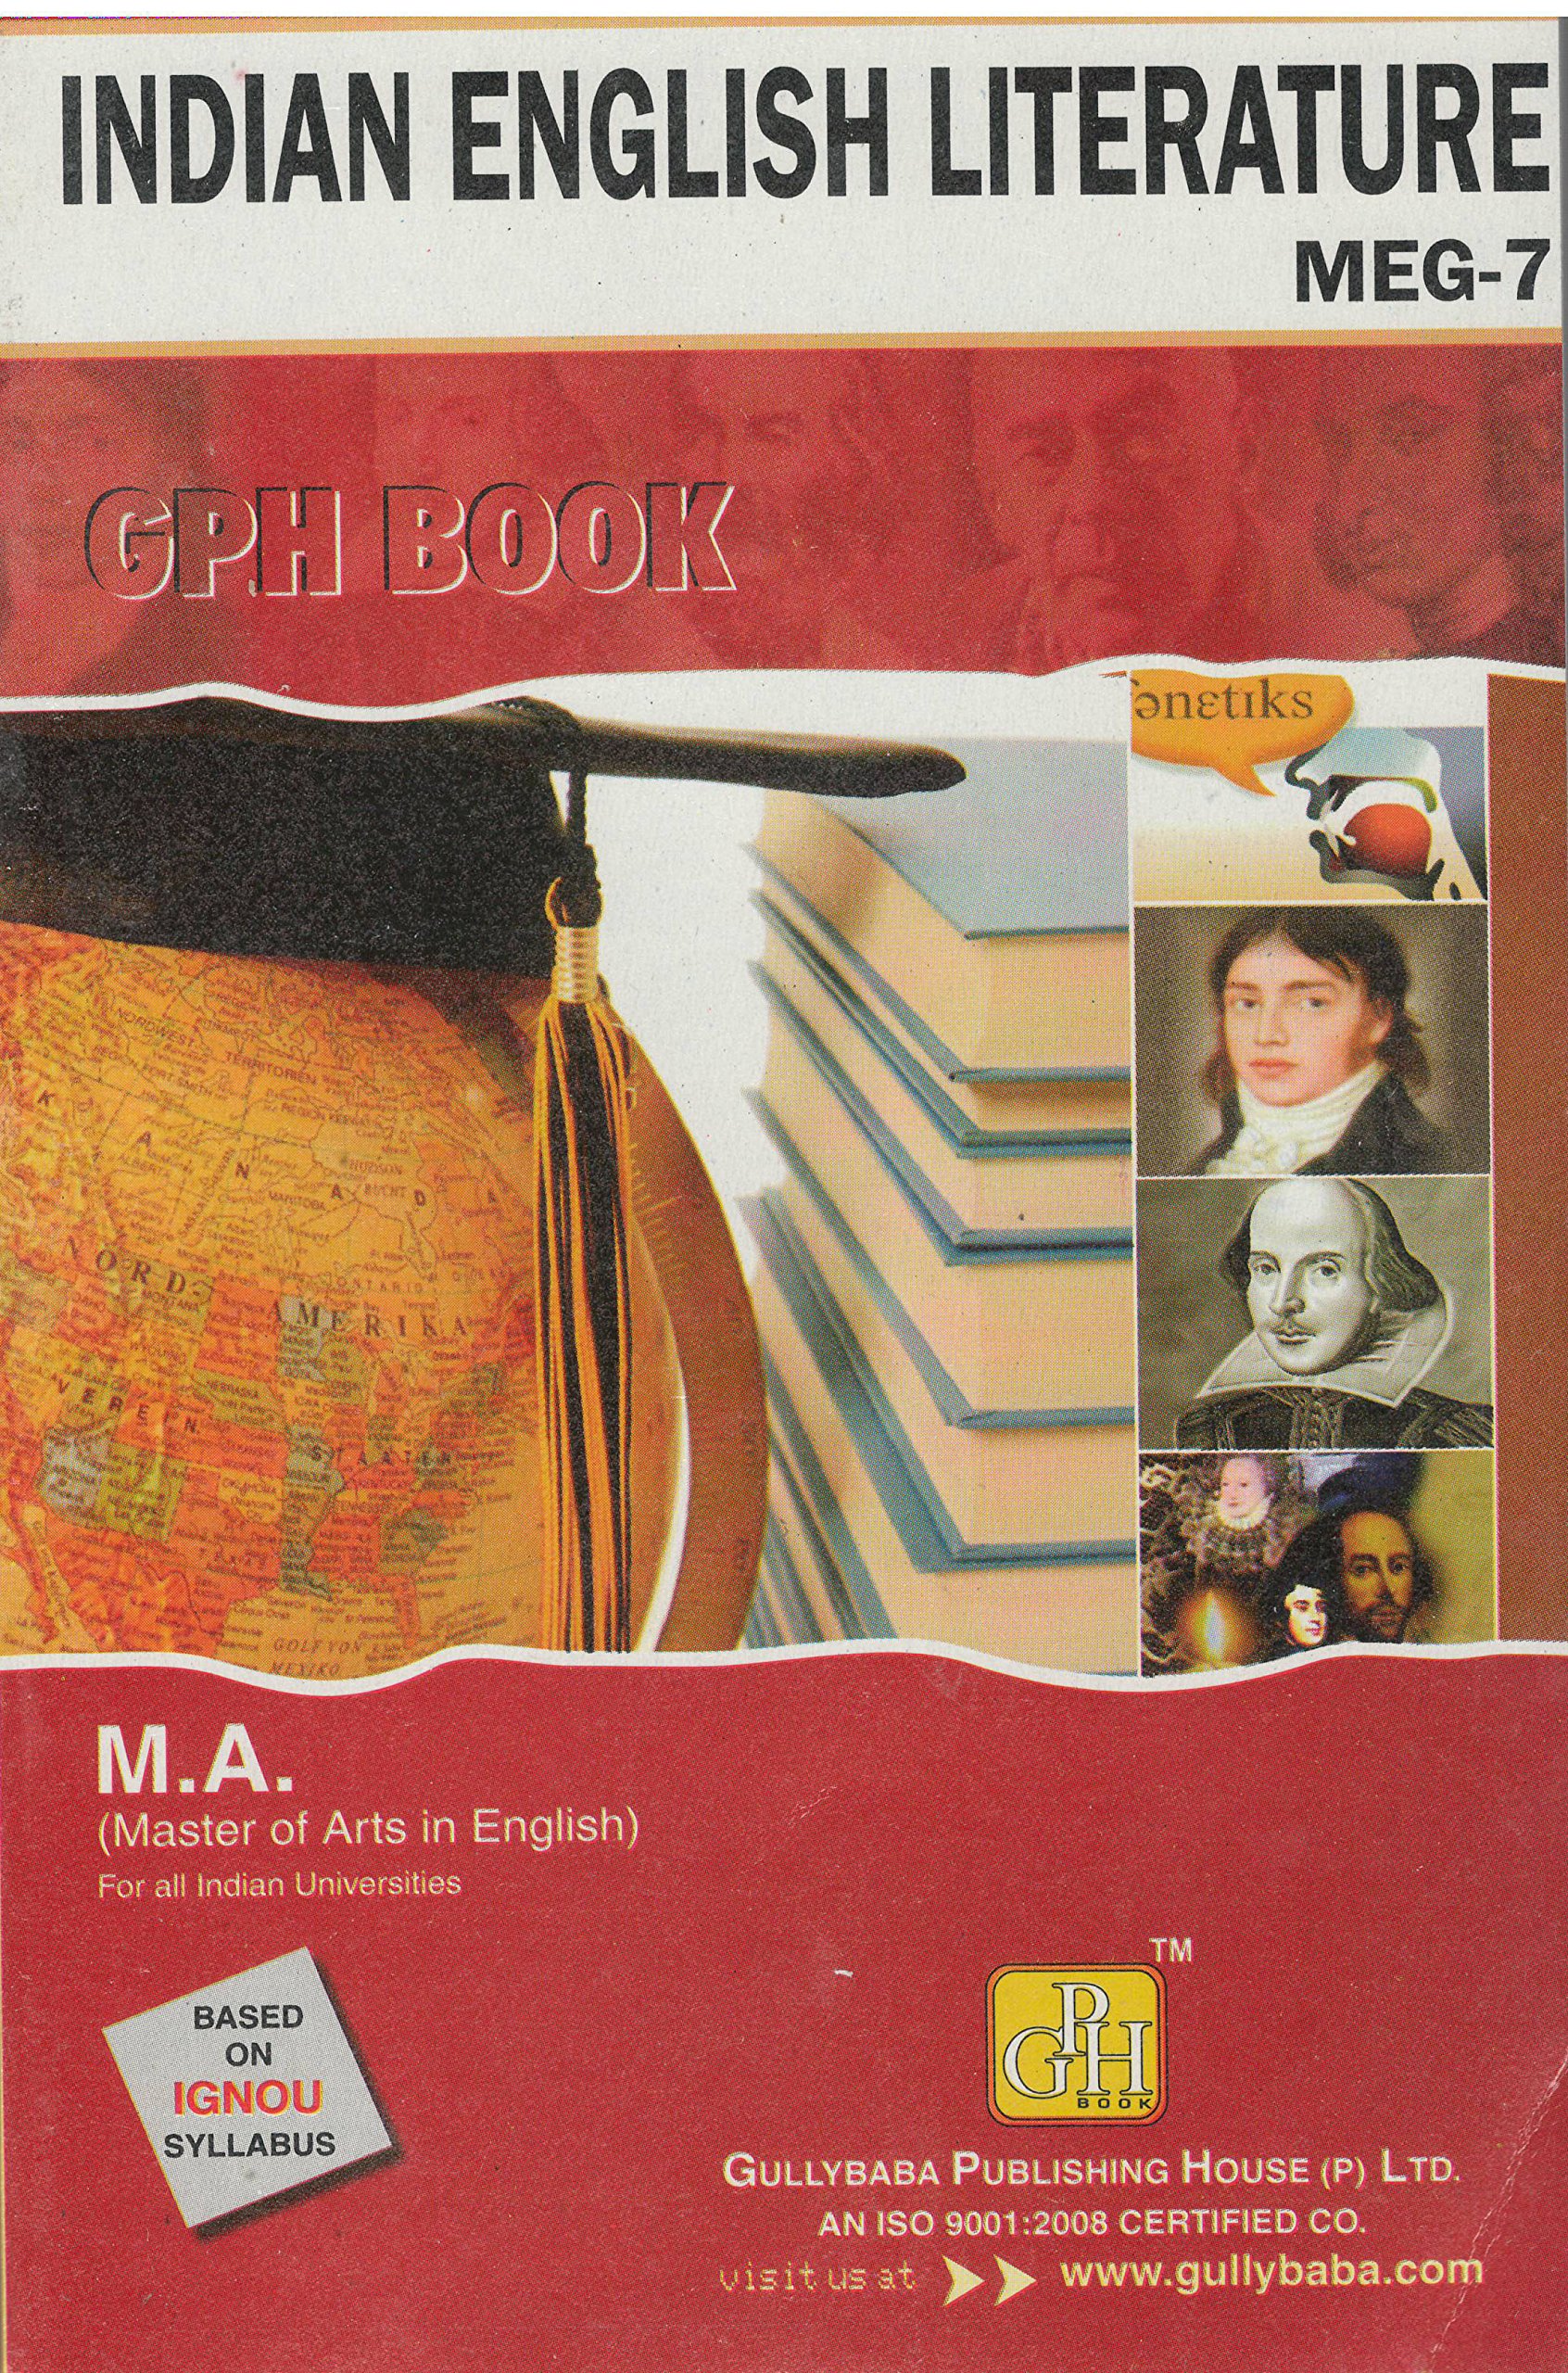 NEW Gullybaba Ignou MA (Latest Edition) MEG-7 Indian English Literature, IGNOU Help Books with Solved Sample Question Papers and Important Exam Notes